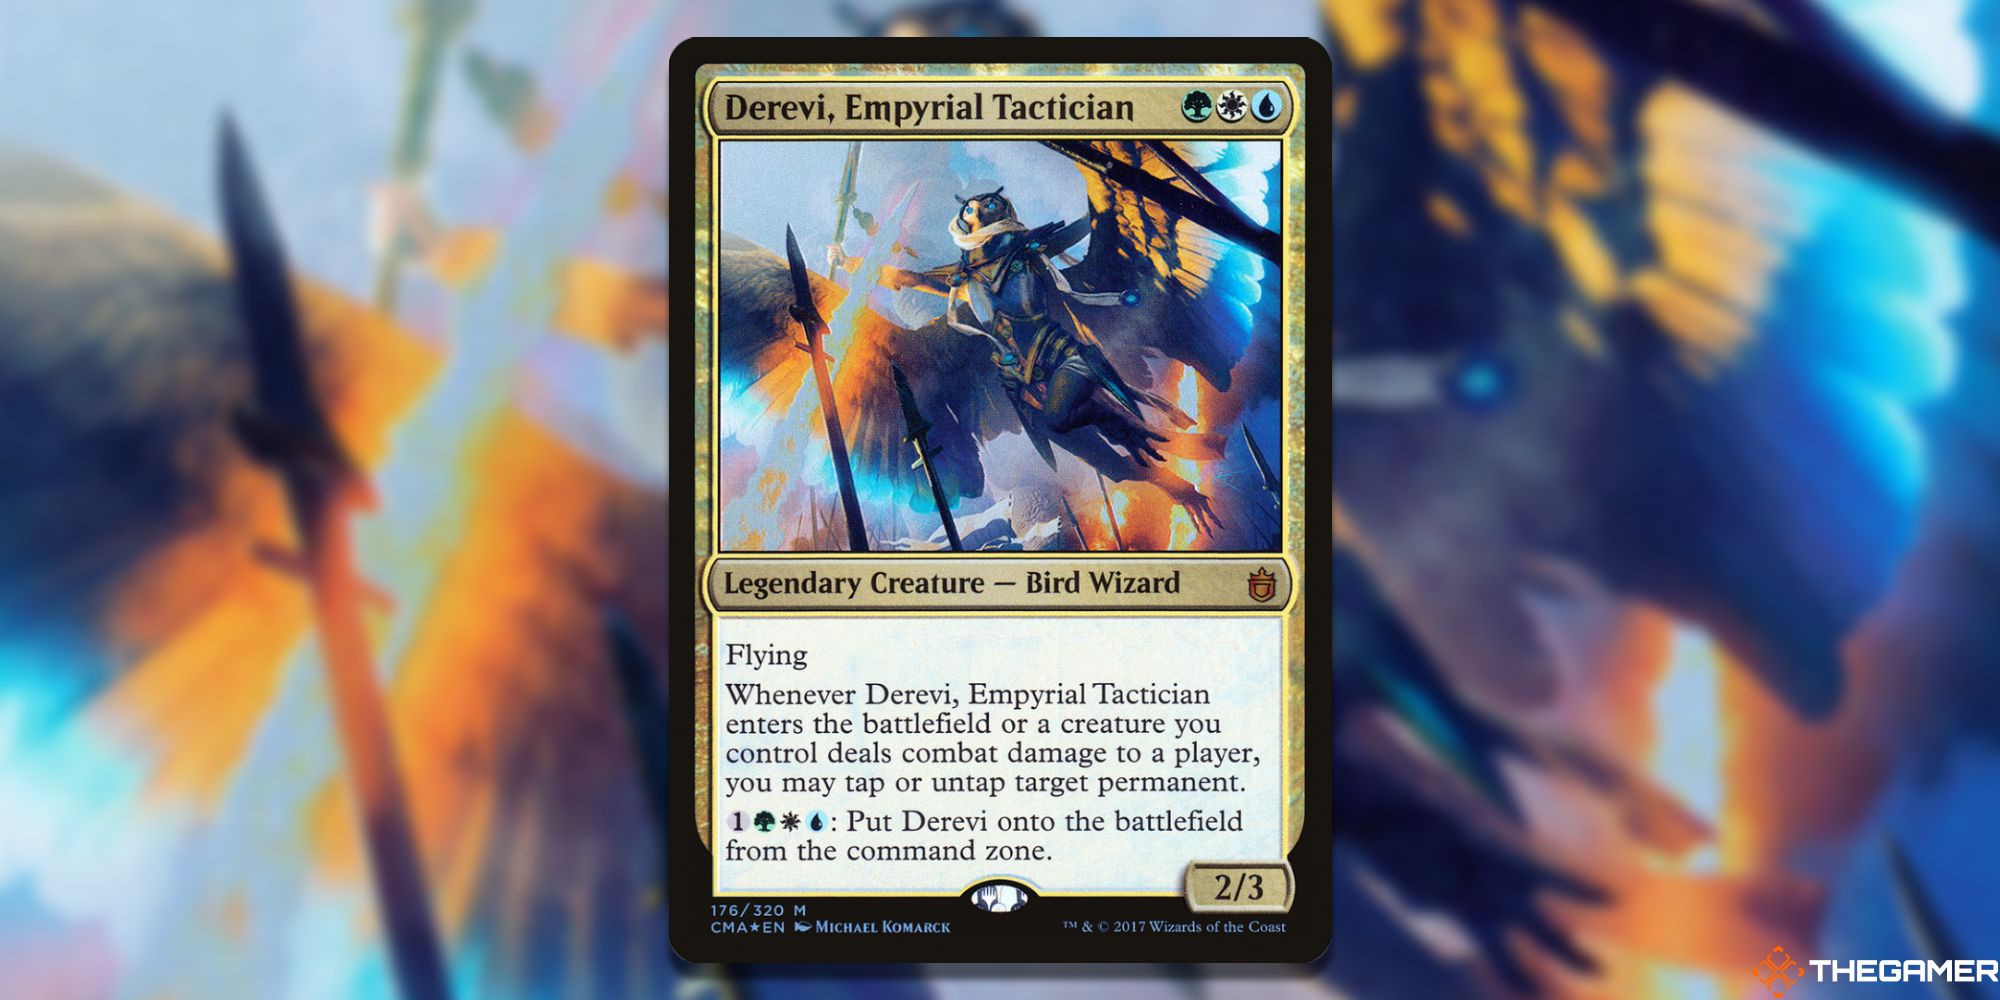 Image of the Derevi, Empyrial Tactician card in Magic: The Gathering, with art by Michael Komarck